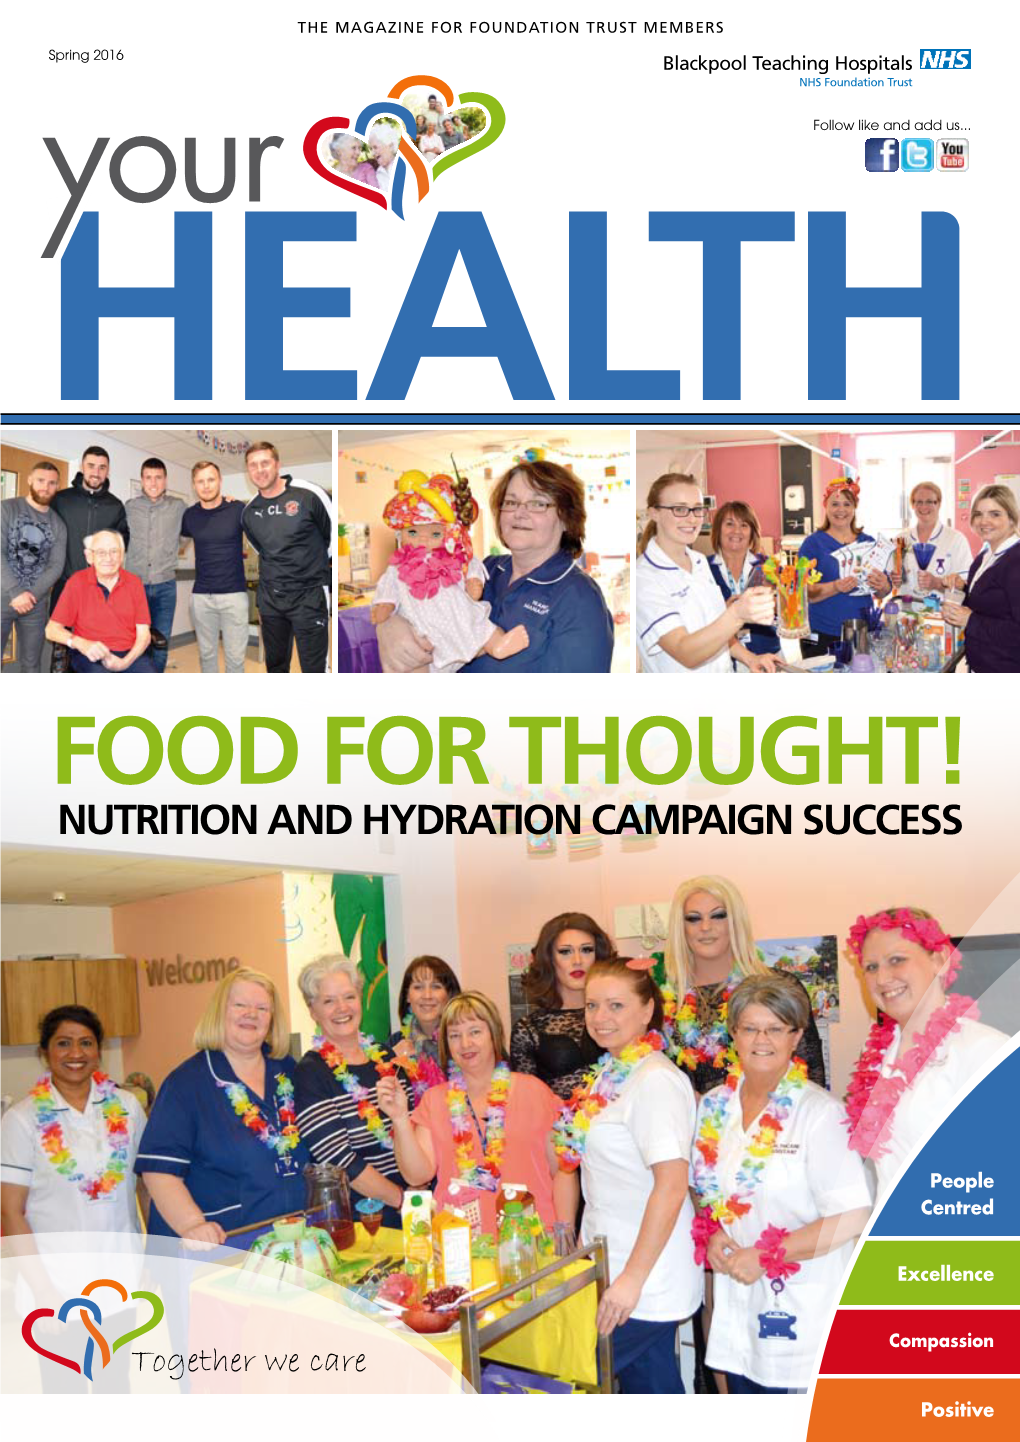 Food for Thought! Nutrition and Hydration Campaign Success